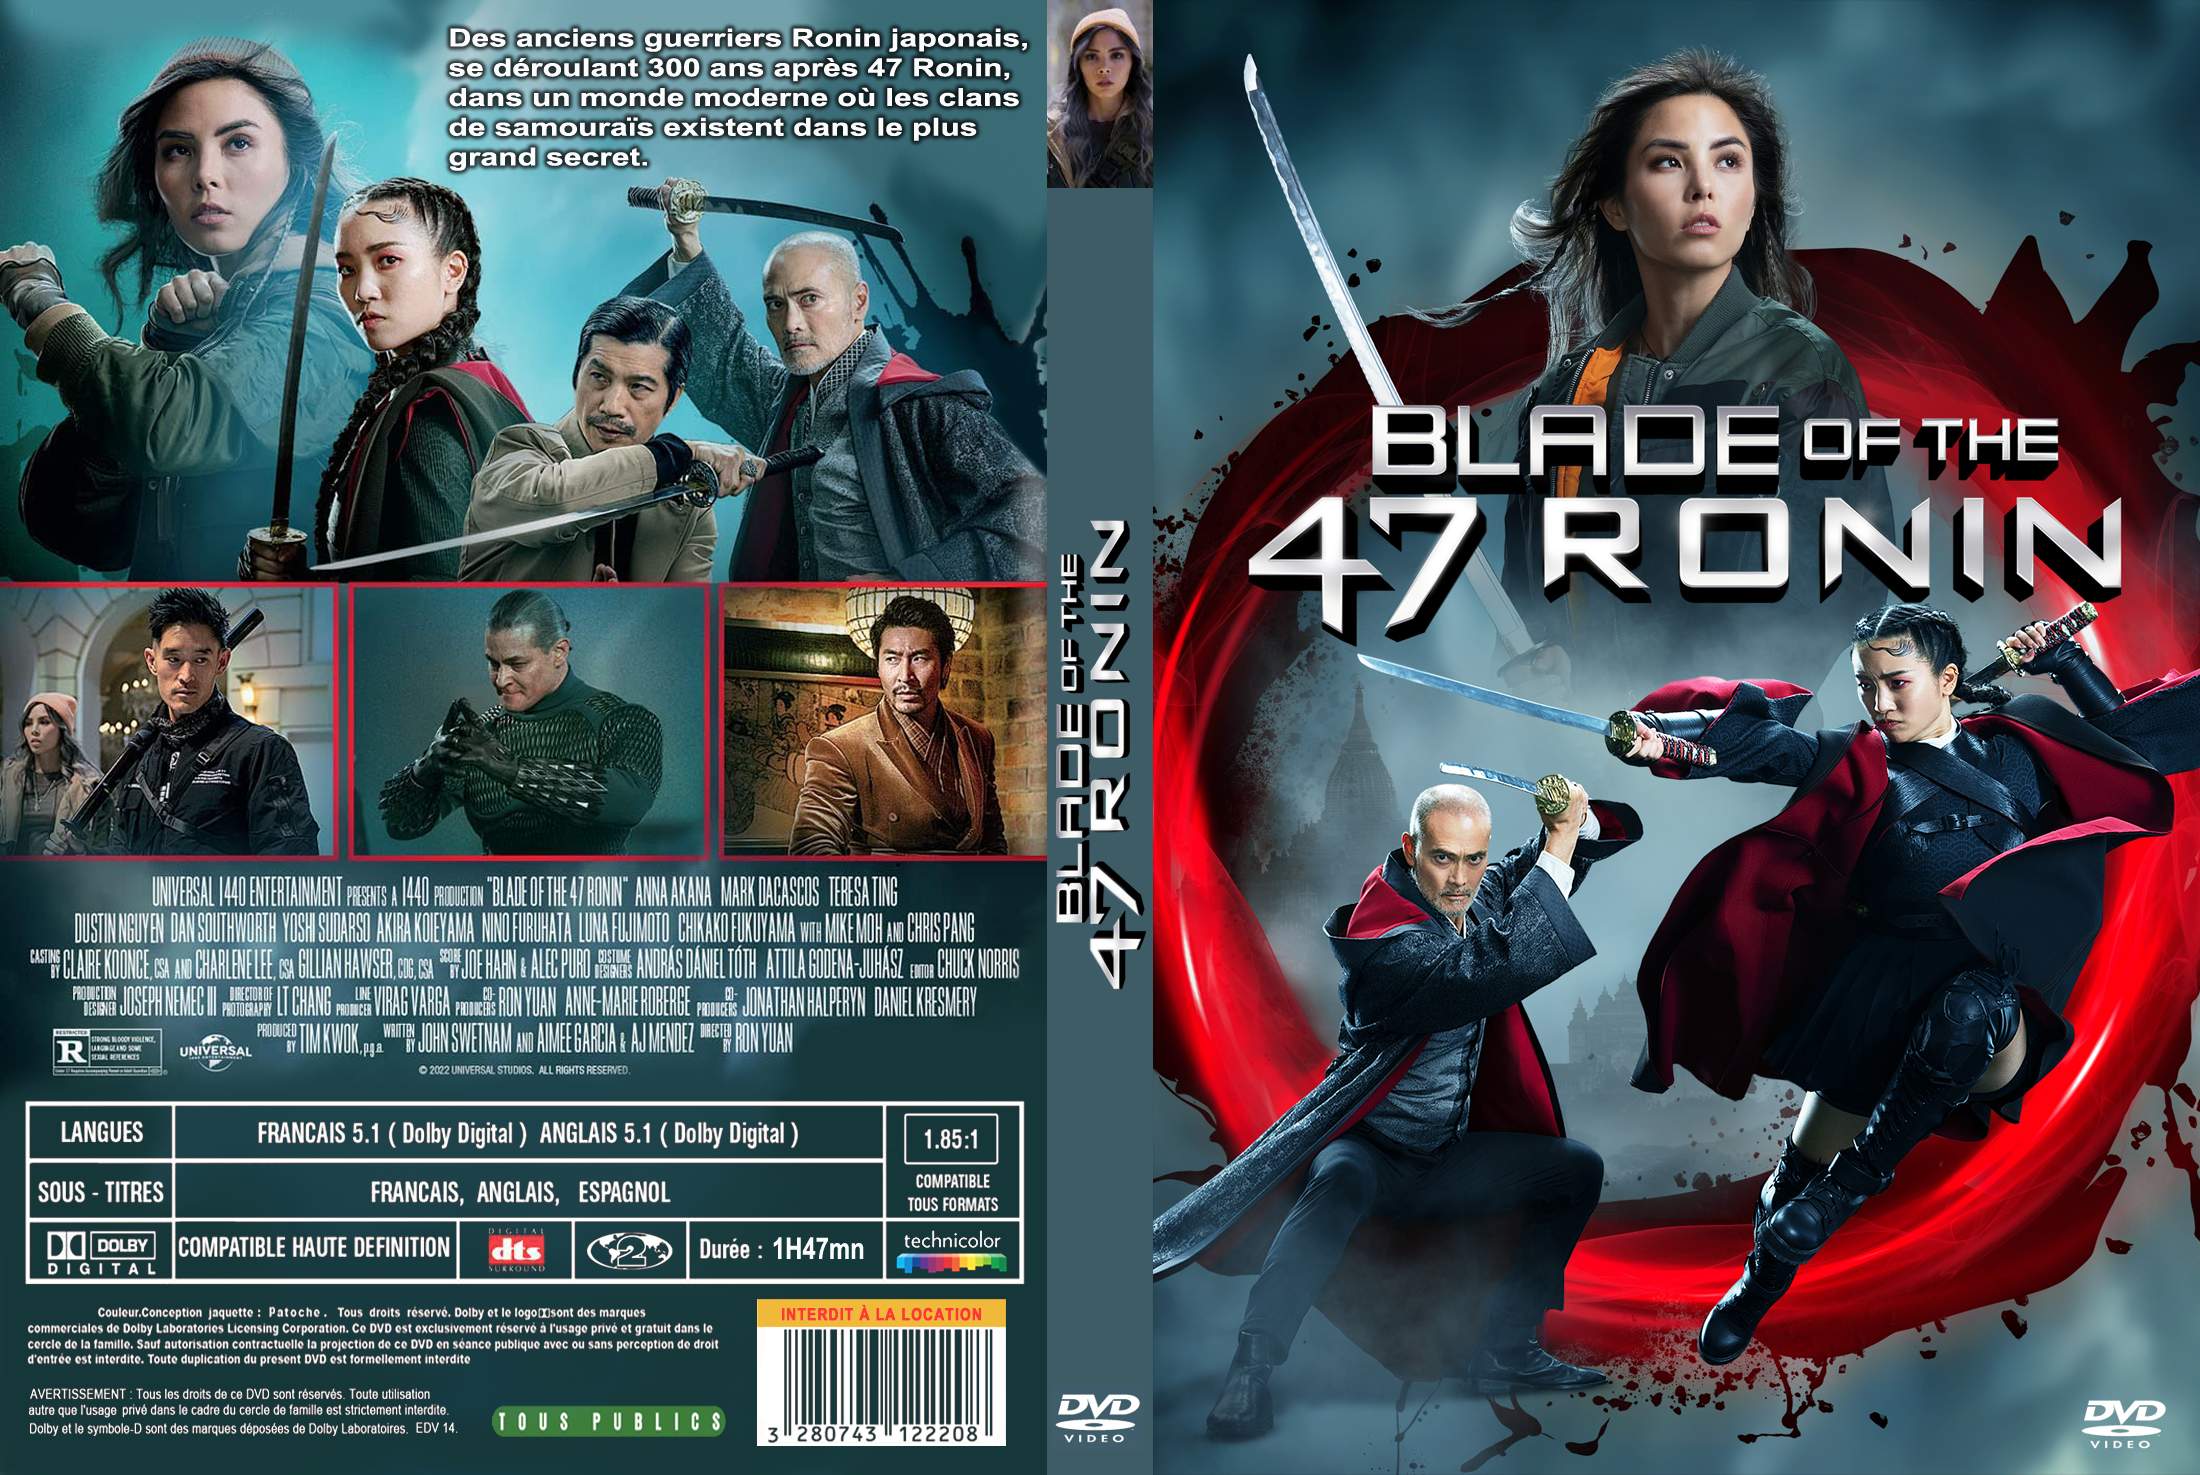 Jaquette DVD Blade Of The 47 Ronin custom